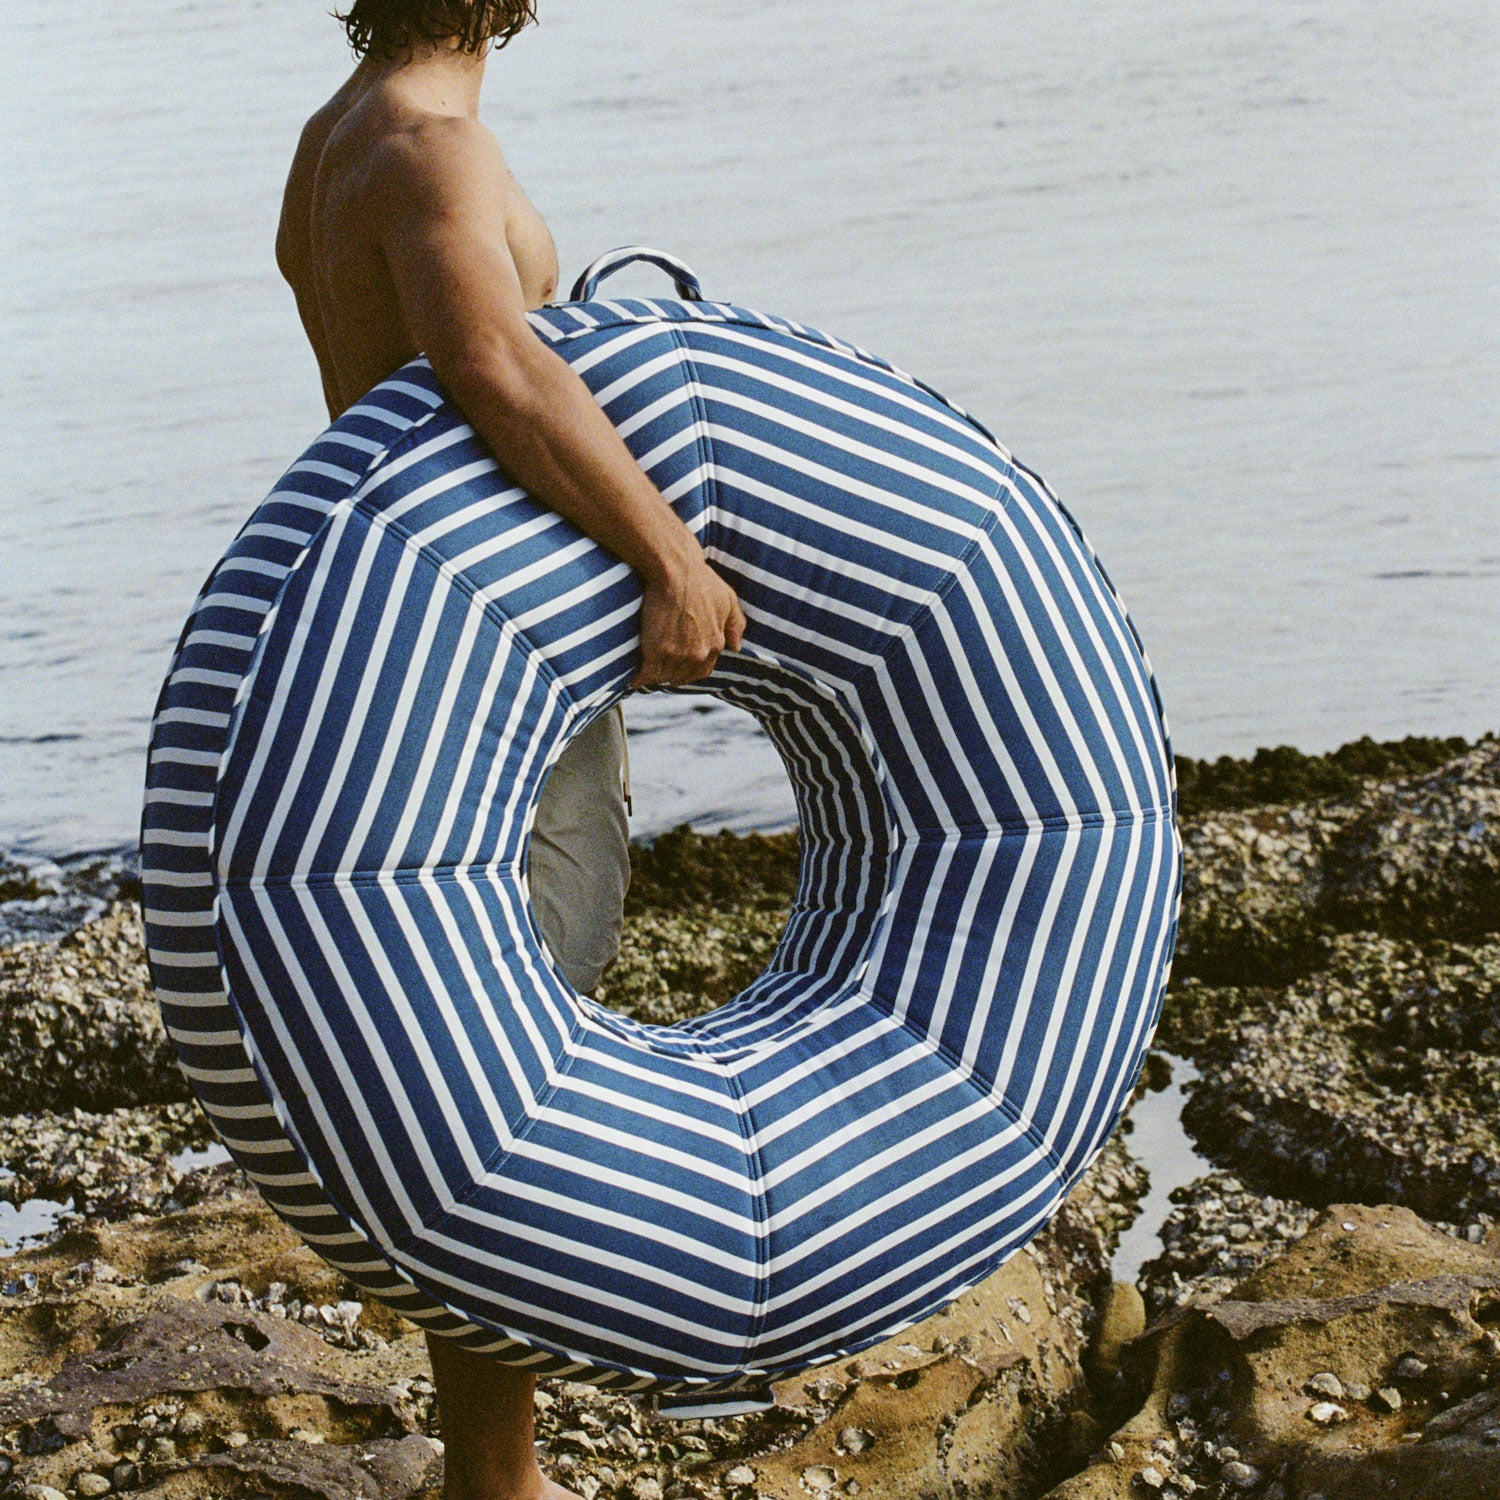 A man carry a blue and white striped fabric ring pool float lounger in one hand on a rocky beach near the ocean. 